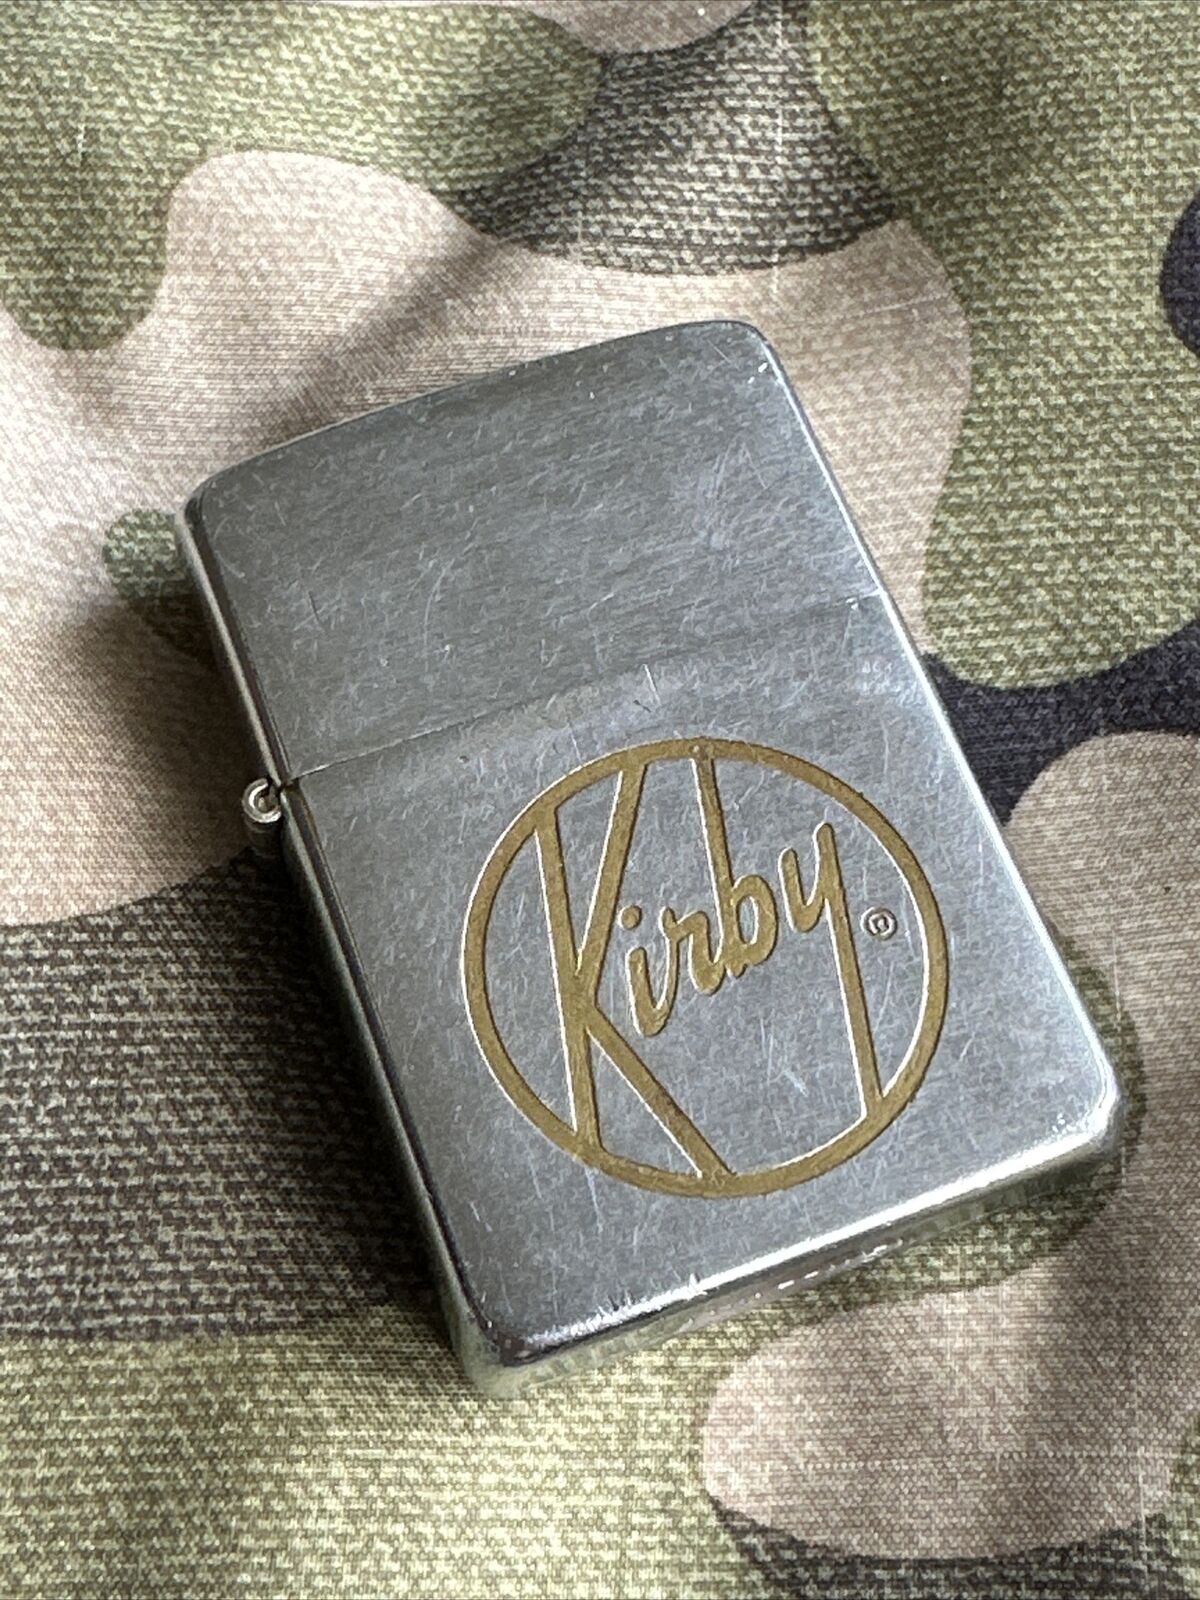 1960 Vintage Zippo Lighter - Kirby Vacuum - Thanks for a Job Well Done